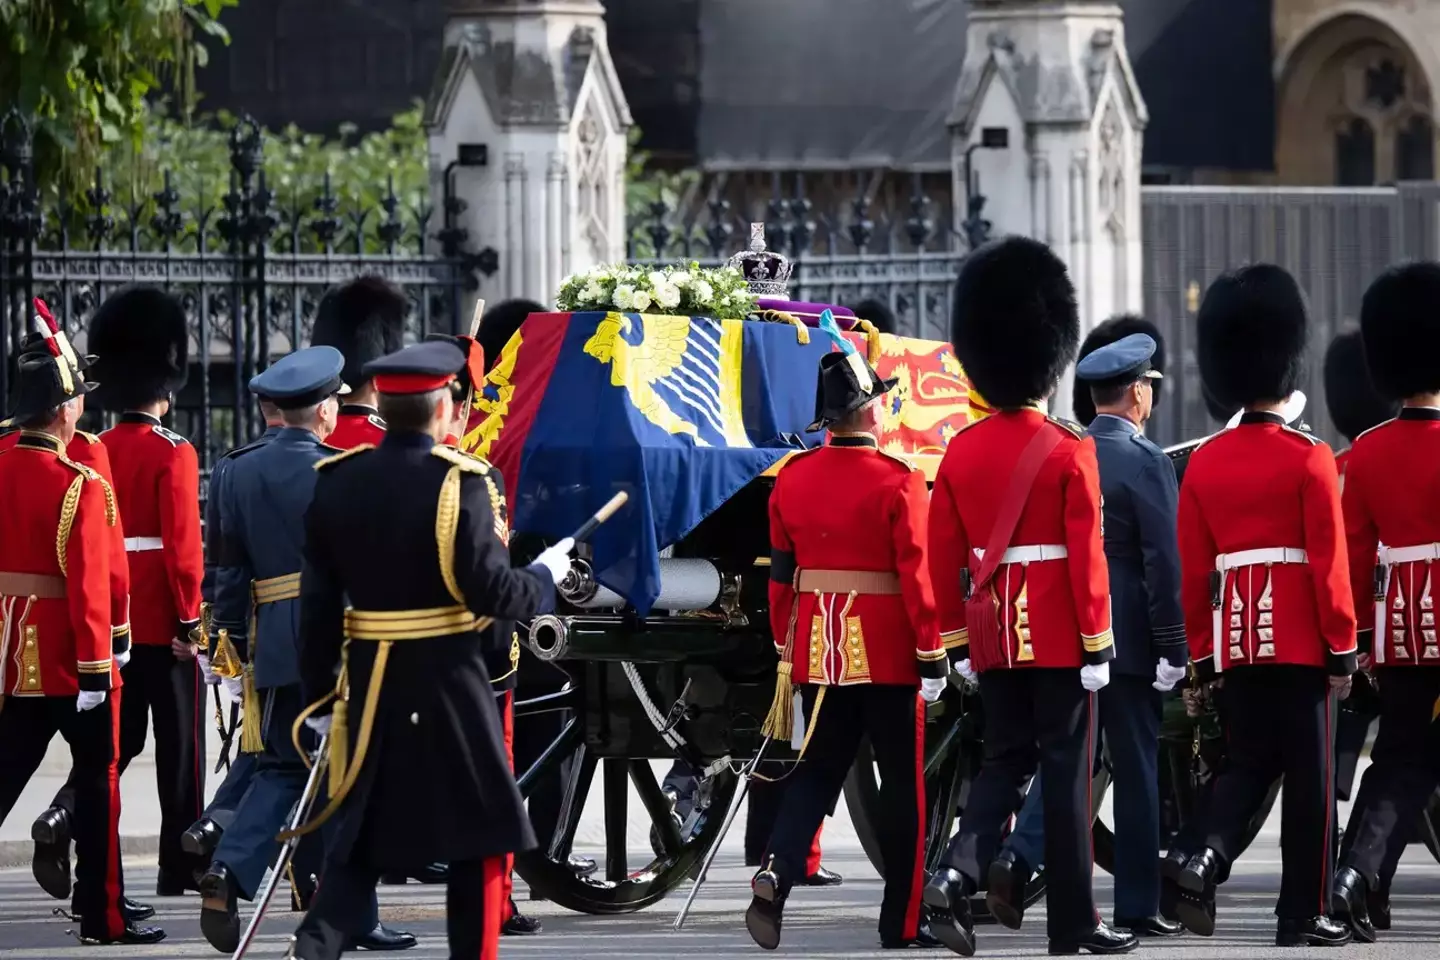 The Queen will be lying-in-state until her funeral surrounded by royal guards.